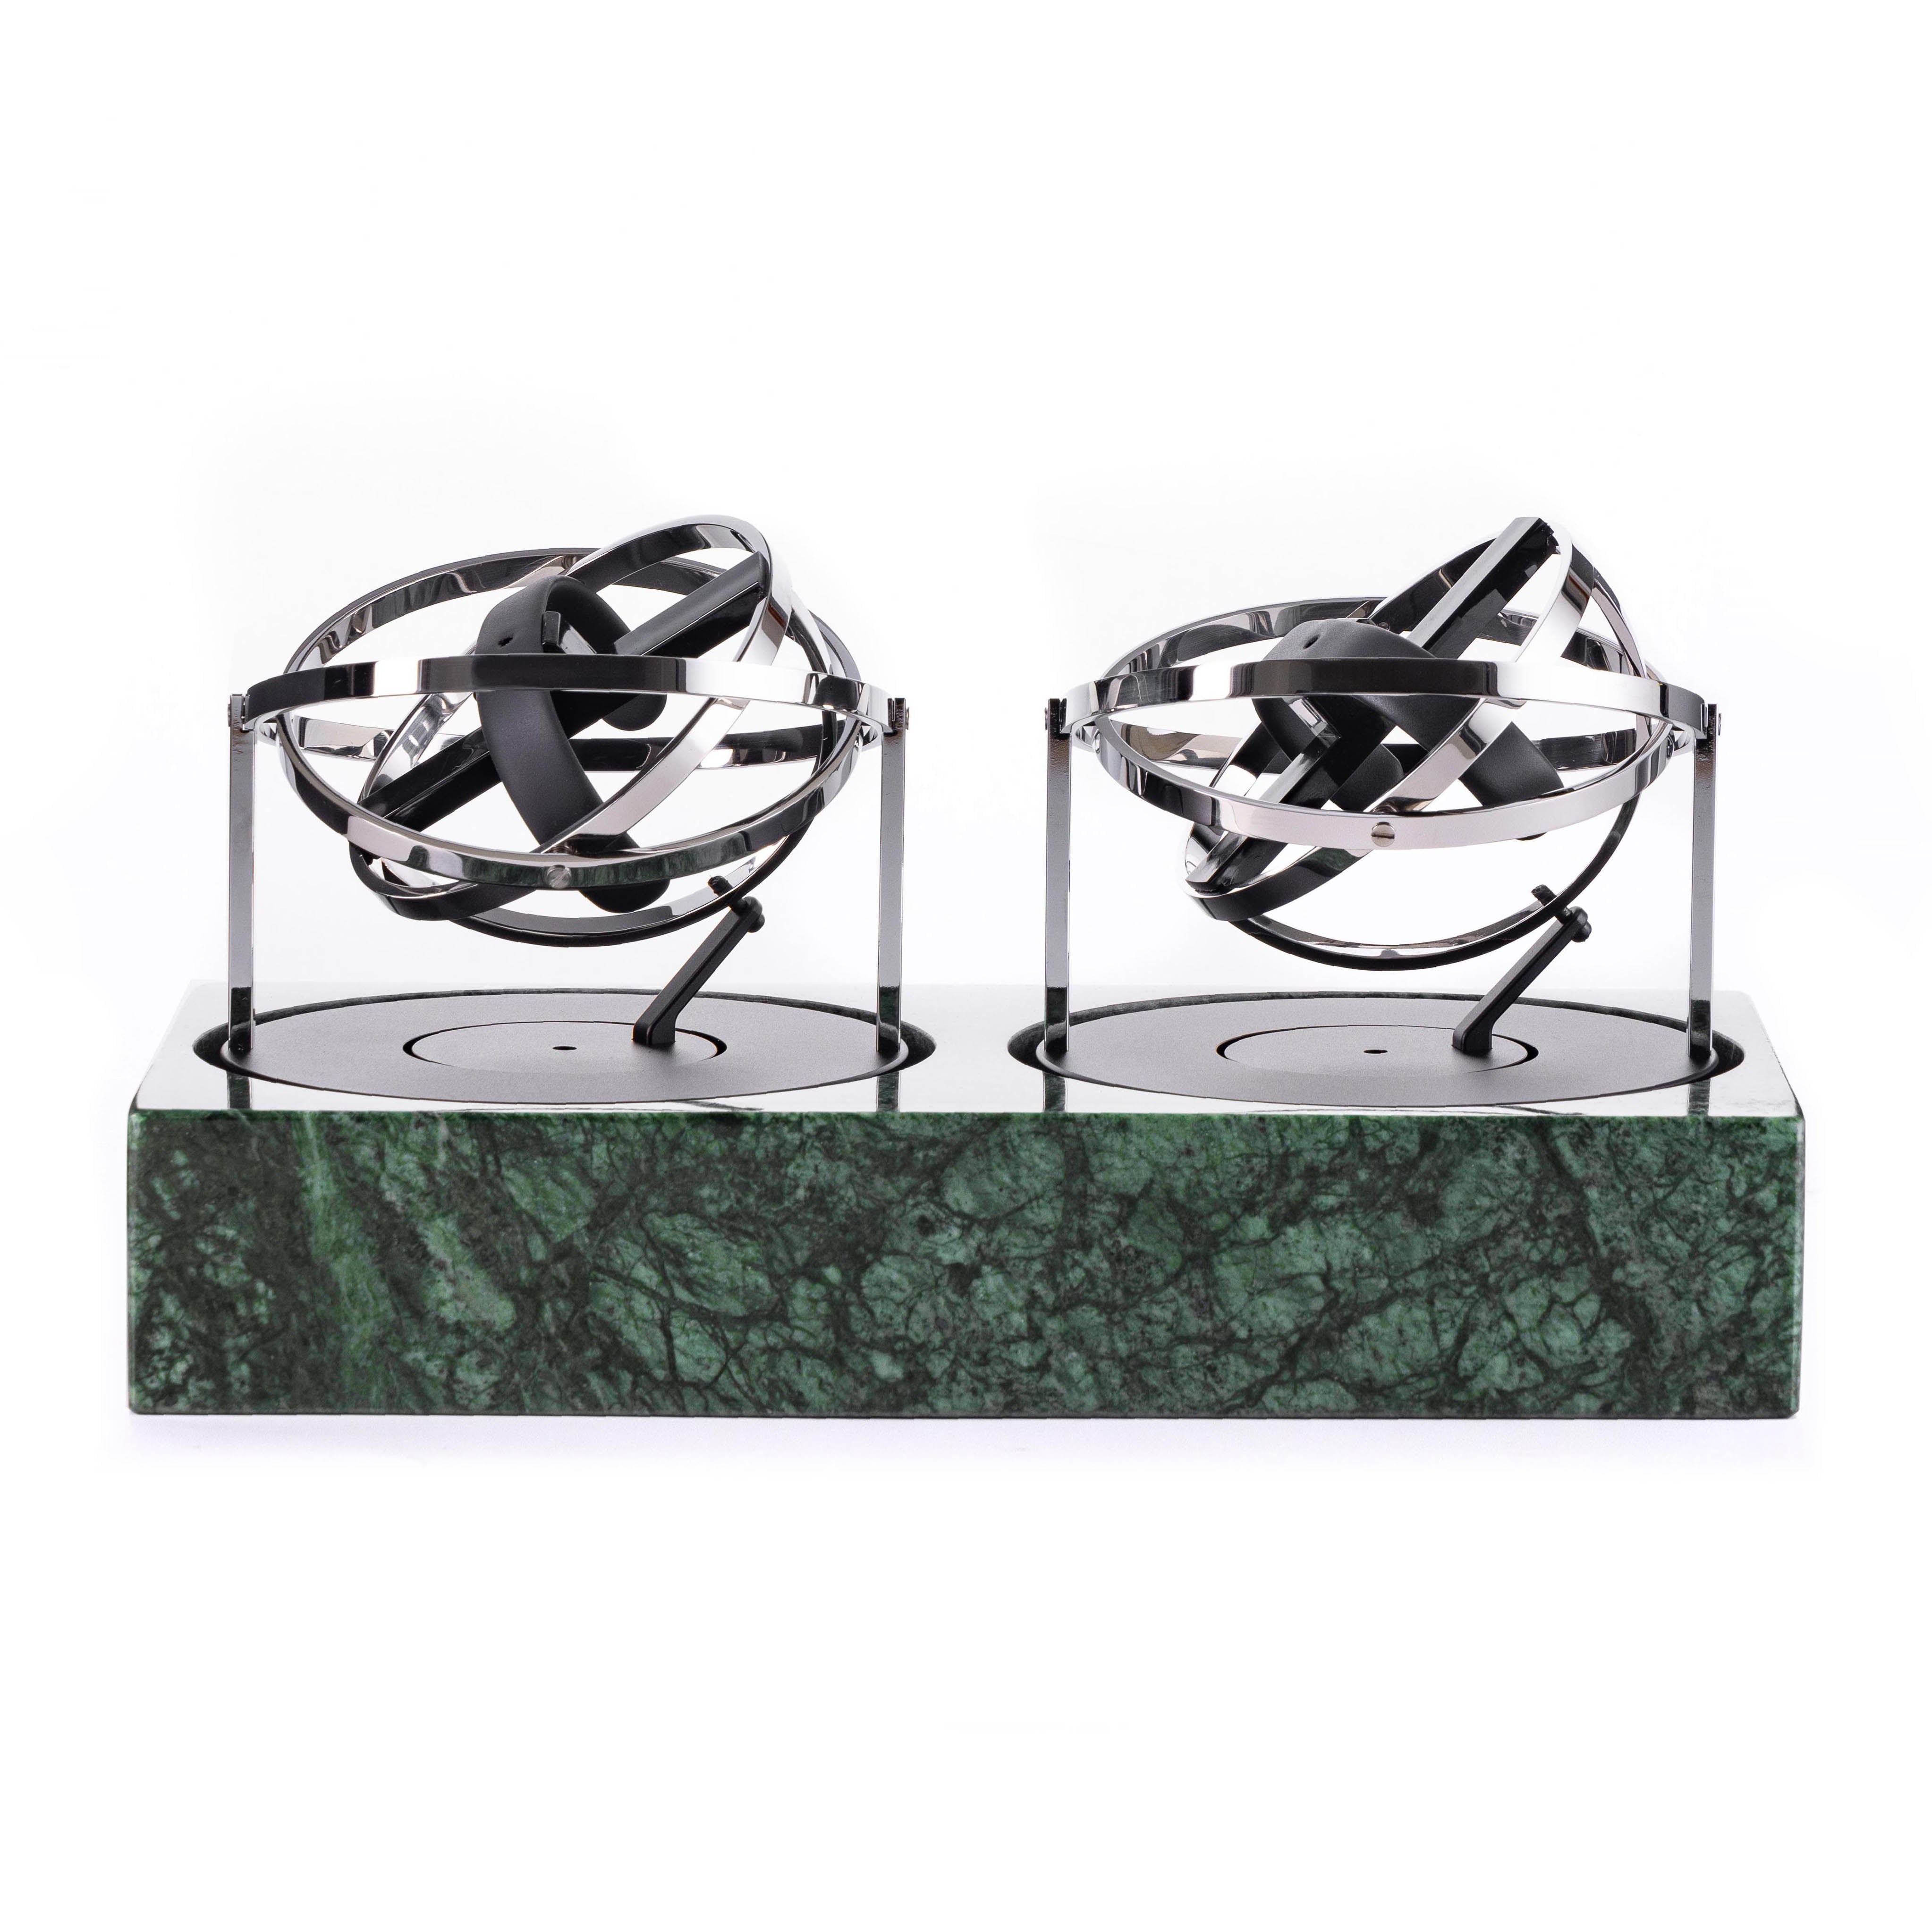 Double Watch Winder - Astronomia X1 Gold - Green Marble Edition